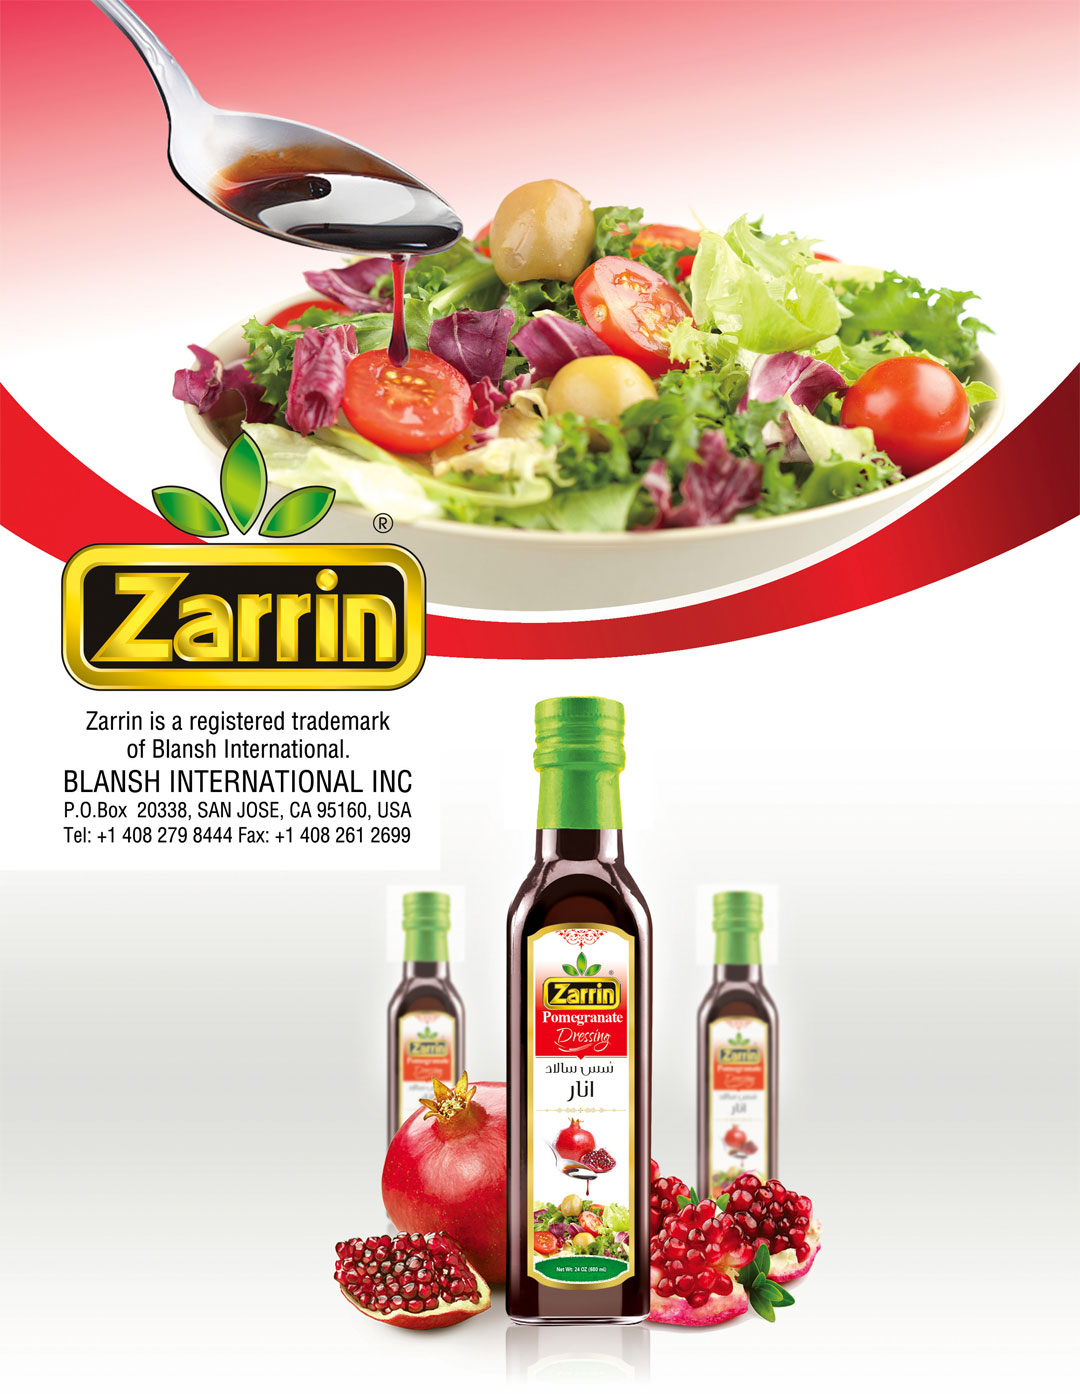 Zarrin is a middle eastern food wholesale with products such as pomegranate molasses.